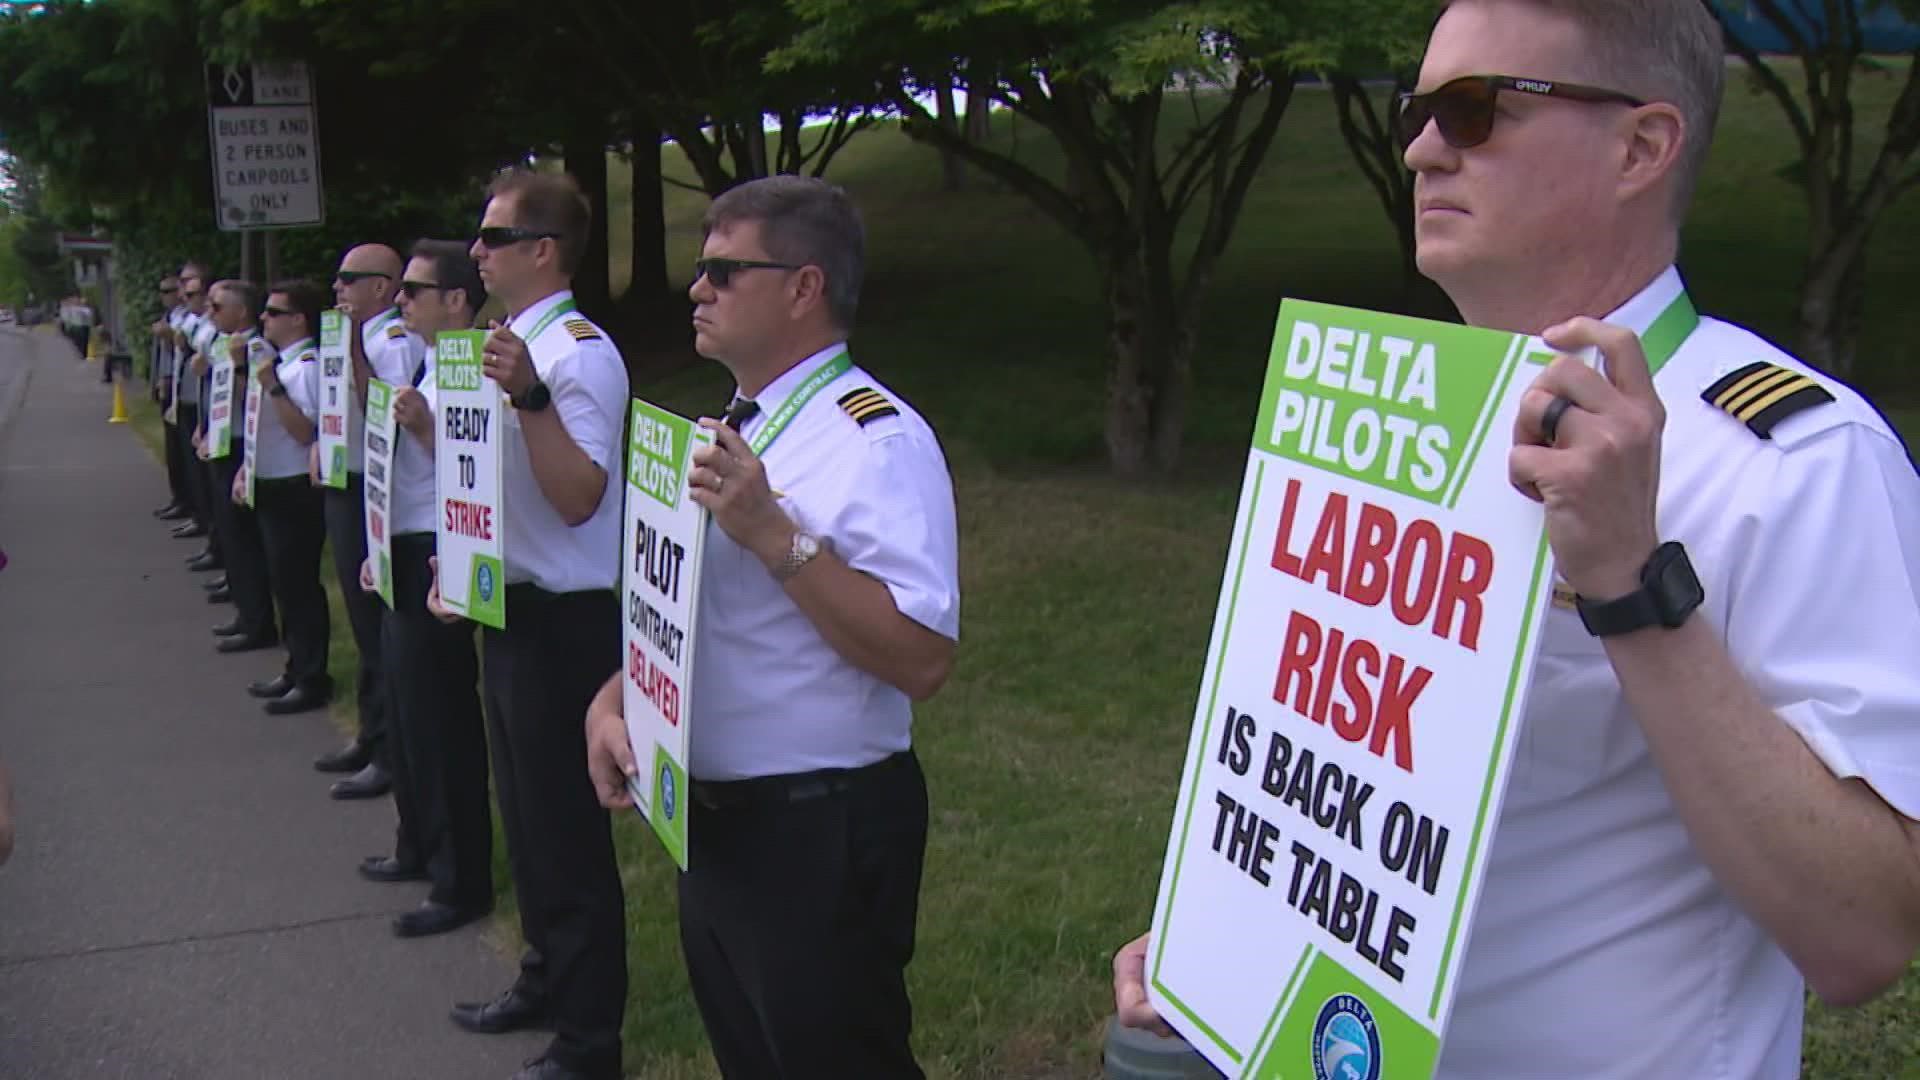 Delta Air Lines pilots picketed outside of Sea-Tac Airport Thursday morning protesting protracted contract negotiations.